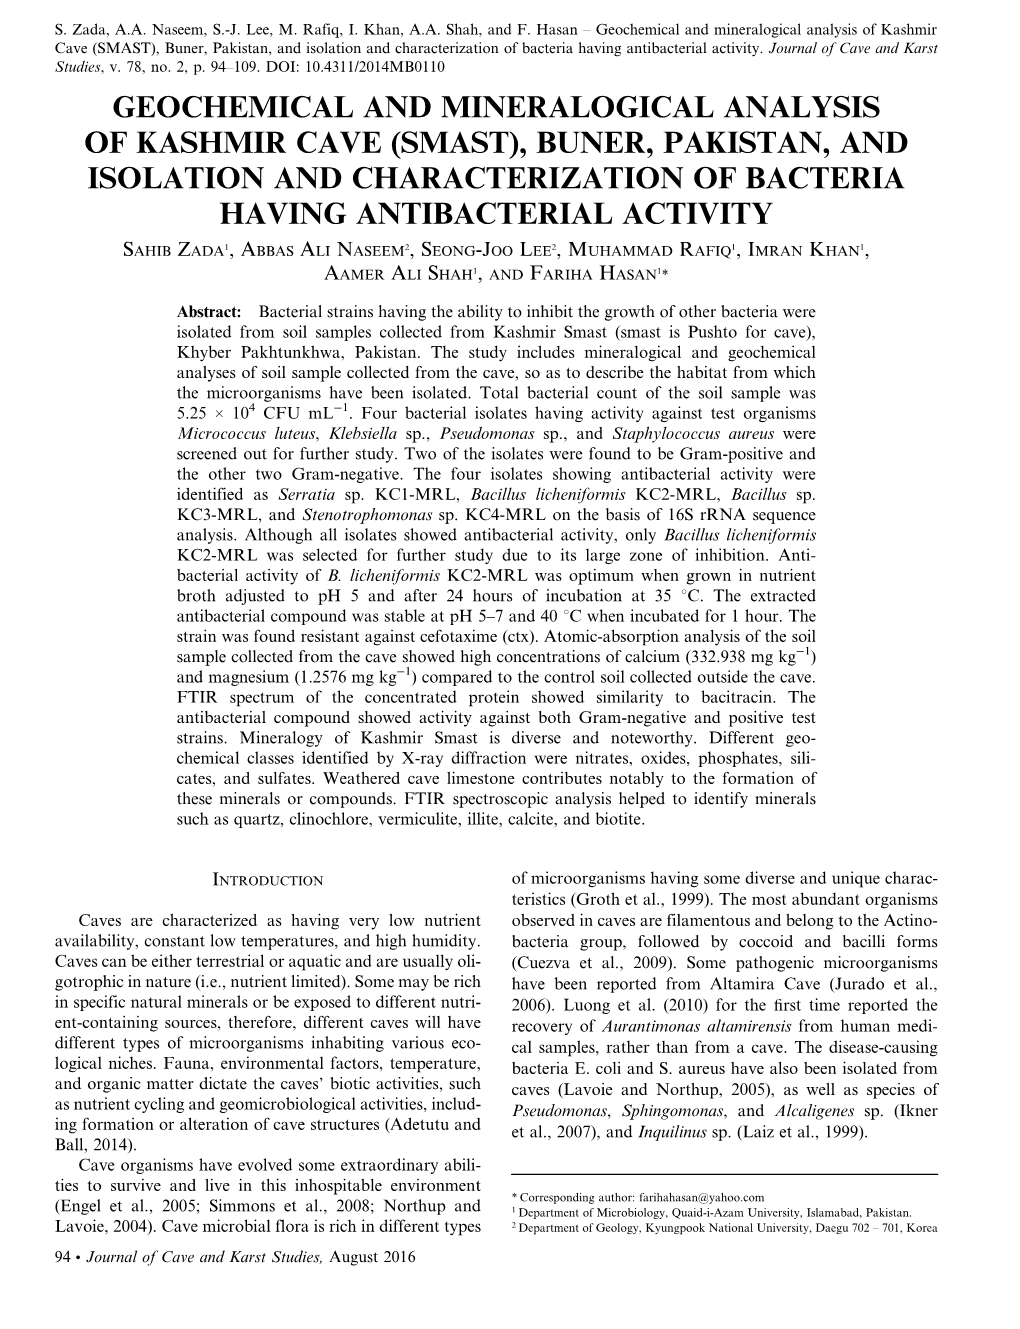 Geochemical and Mineralogical Analysis of Kashmir Cave (SMAST), Buner, Pakistan, and Isolation and Characterization of Bacteria Having Antibacterial Activity